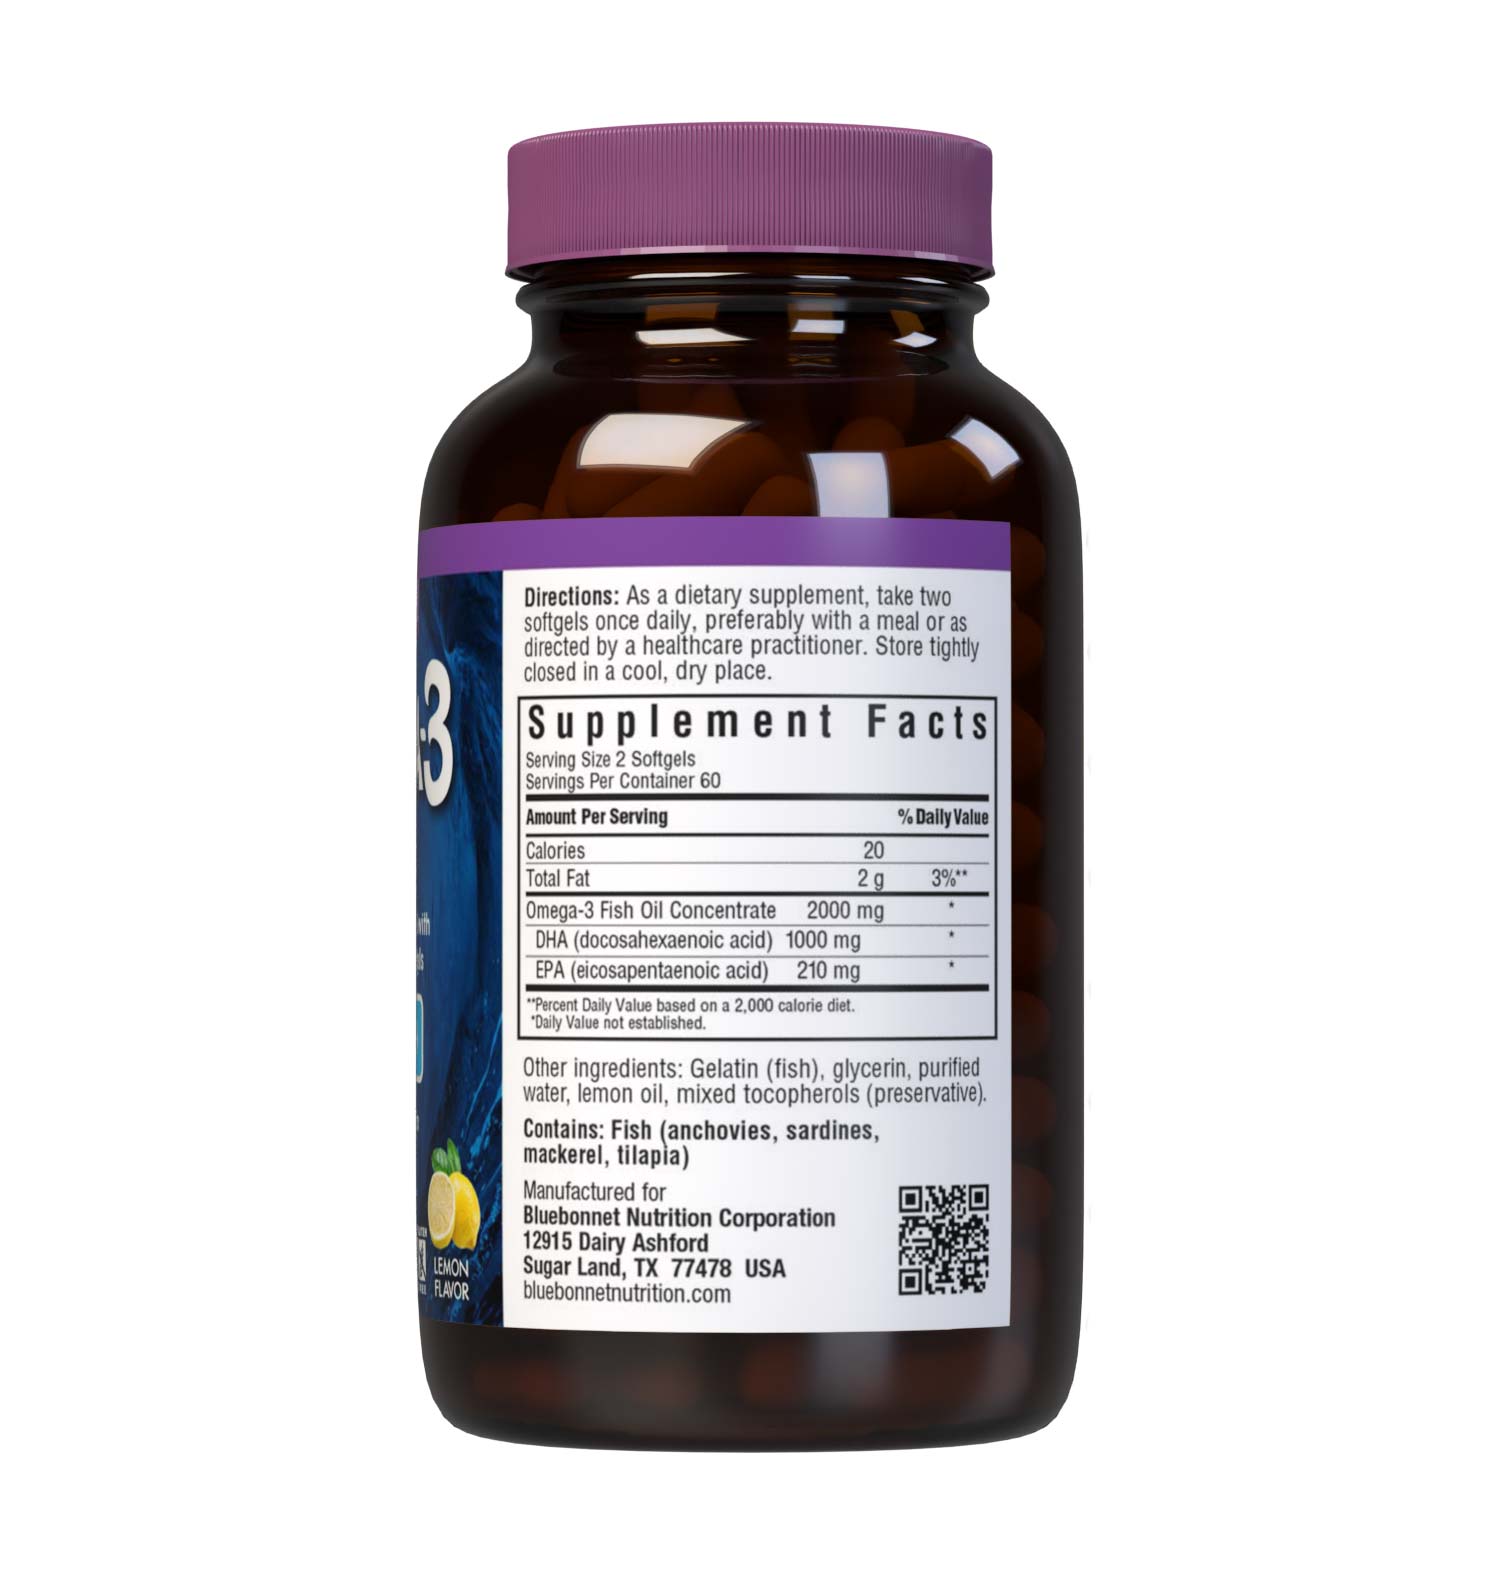 Bluebonnet’s Omega-3 Fish Oil Brain Health 120 Softgels are formulated with a specific ratio of DHA and EPA to help support brain function, mood, and focus by utilizing ultra-refined omega-3s from wild-caught fish. Supplement facts panel. #size_120 count